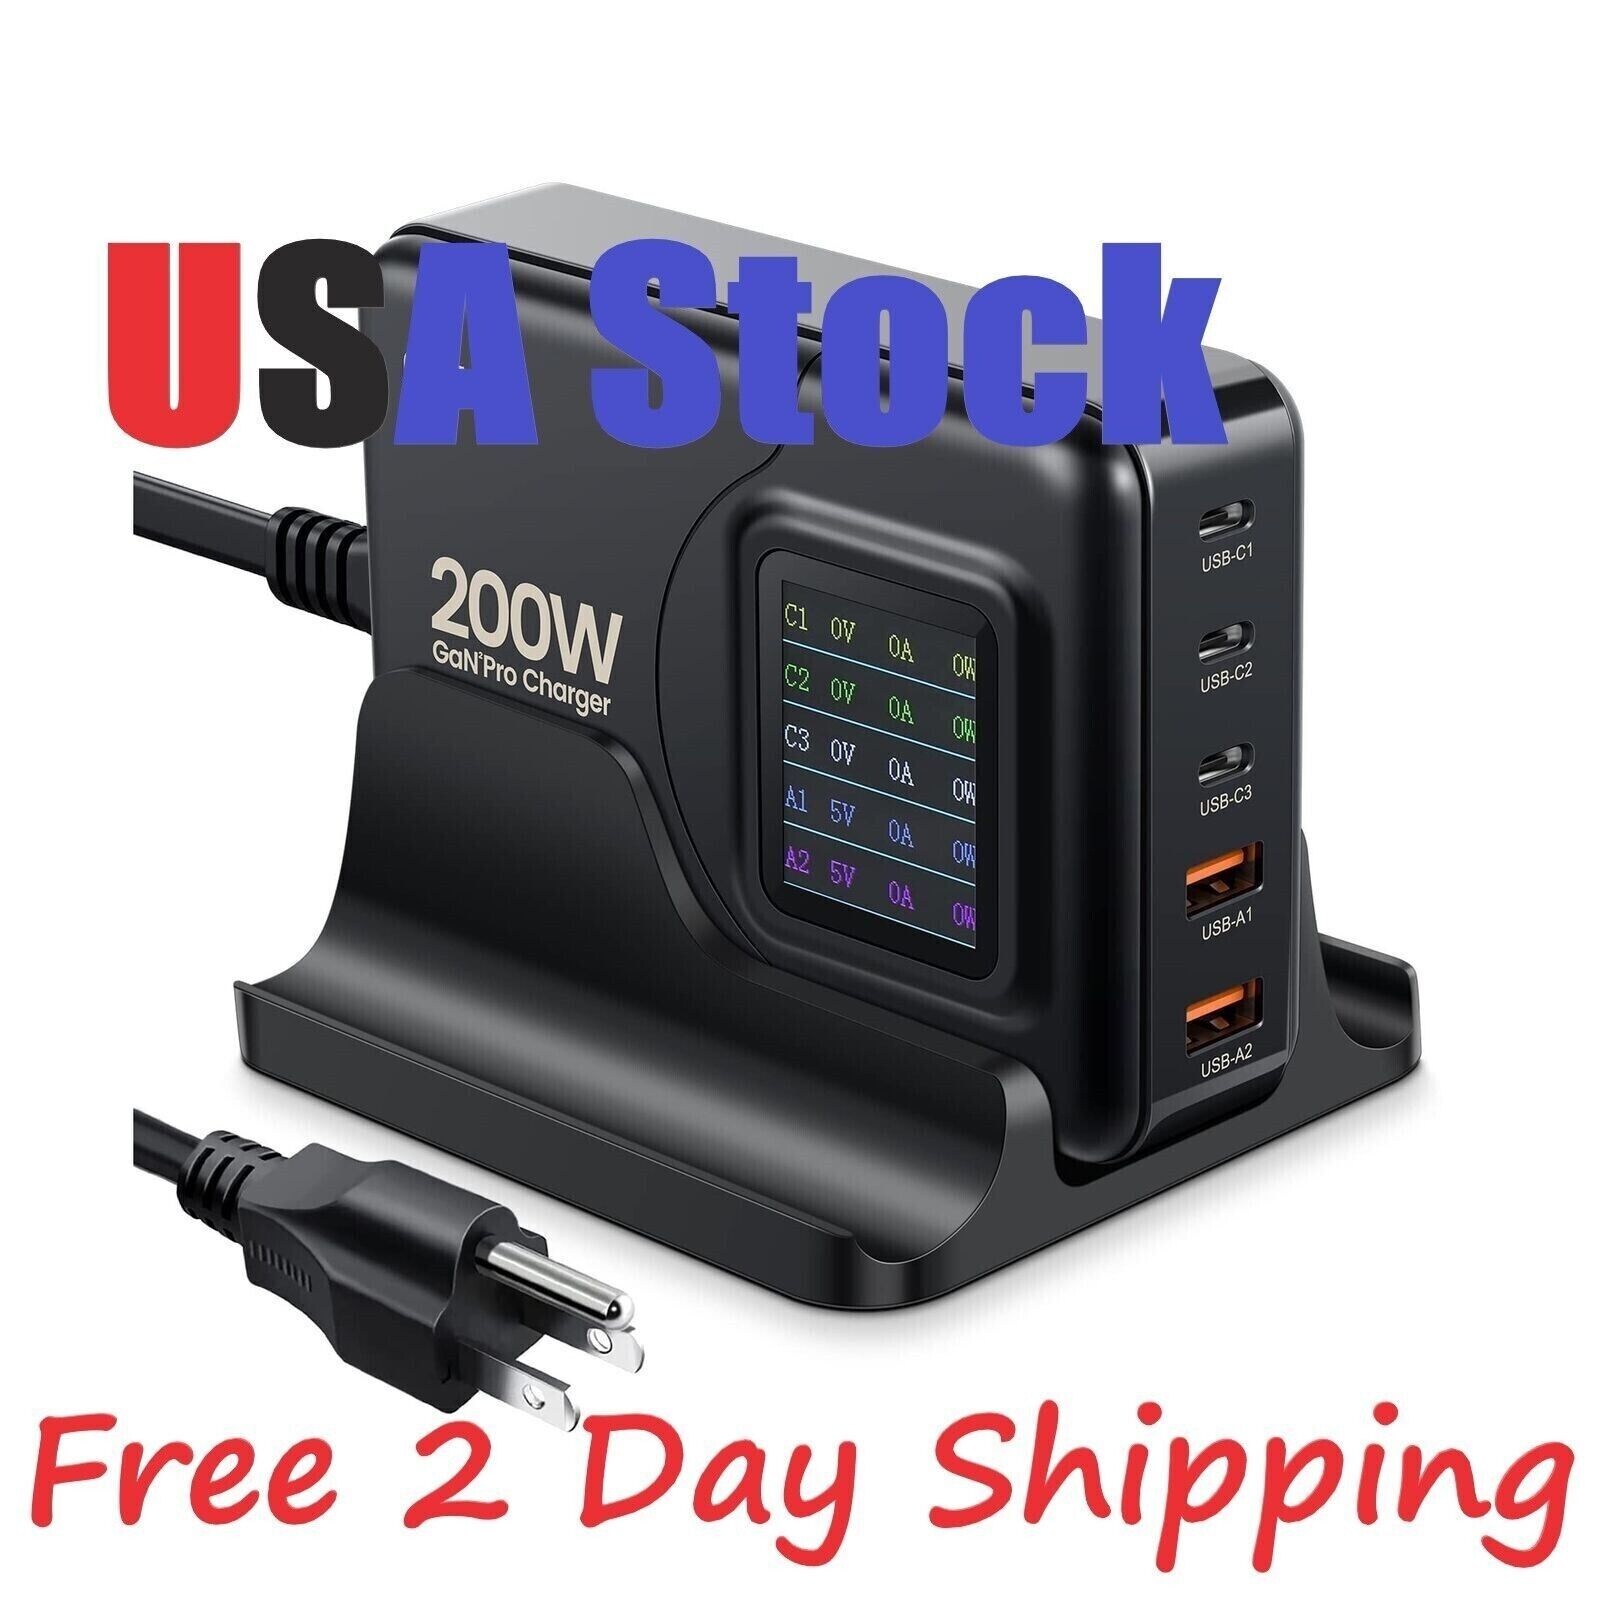 200W USB C Charger 5-Port GaN Charger LCD Display Power Delivery 3.0 QC Usb-c